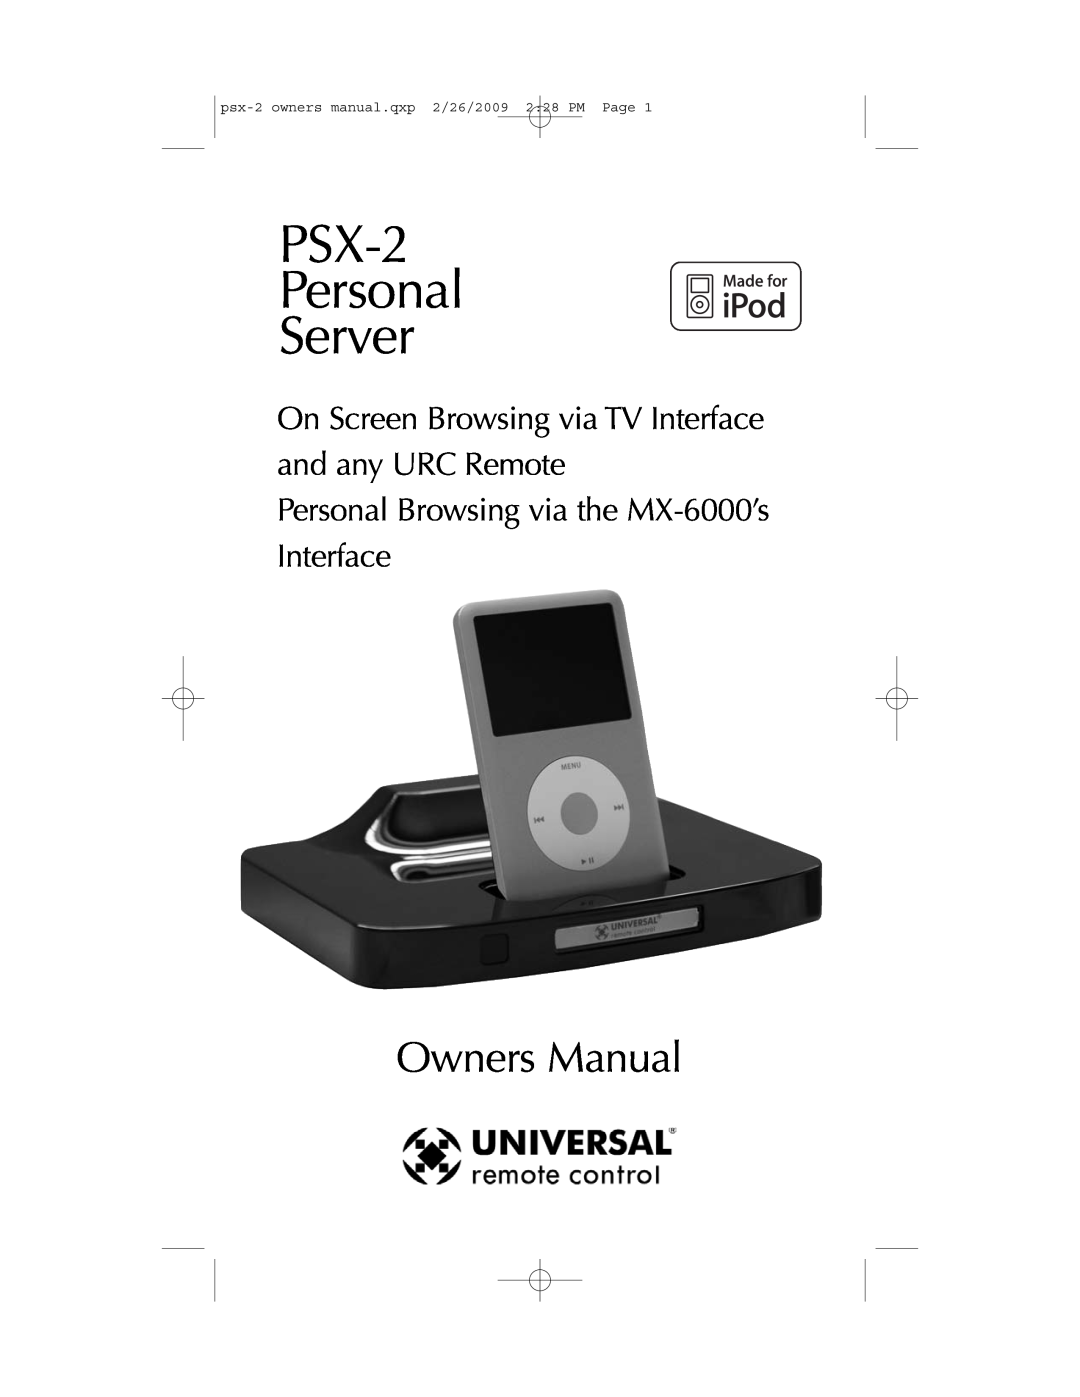 Universal owner manual PSX-2 Personal Server, Owners Manual, On Screen Browsing via TV Interface and any URC Remote 